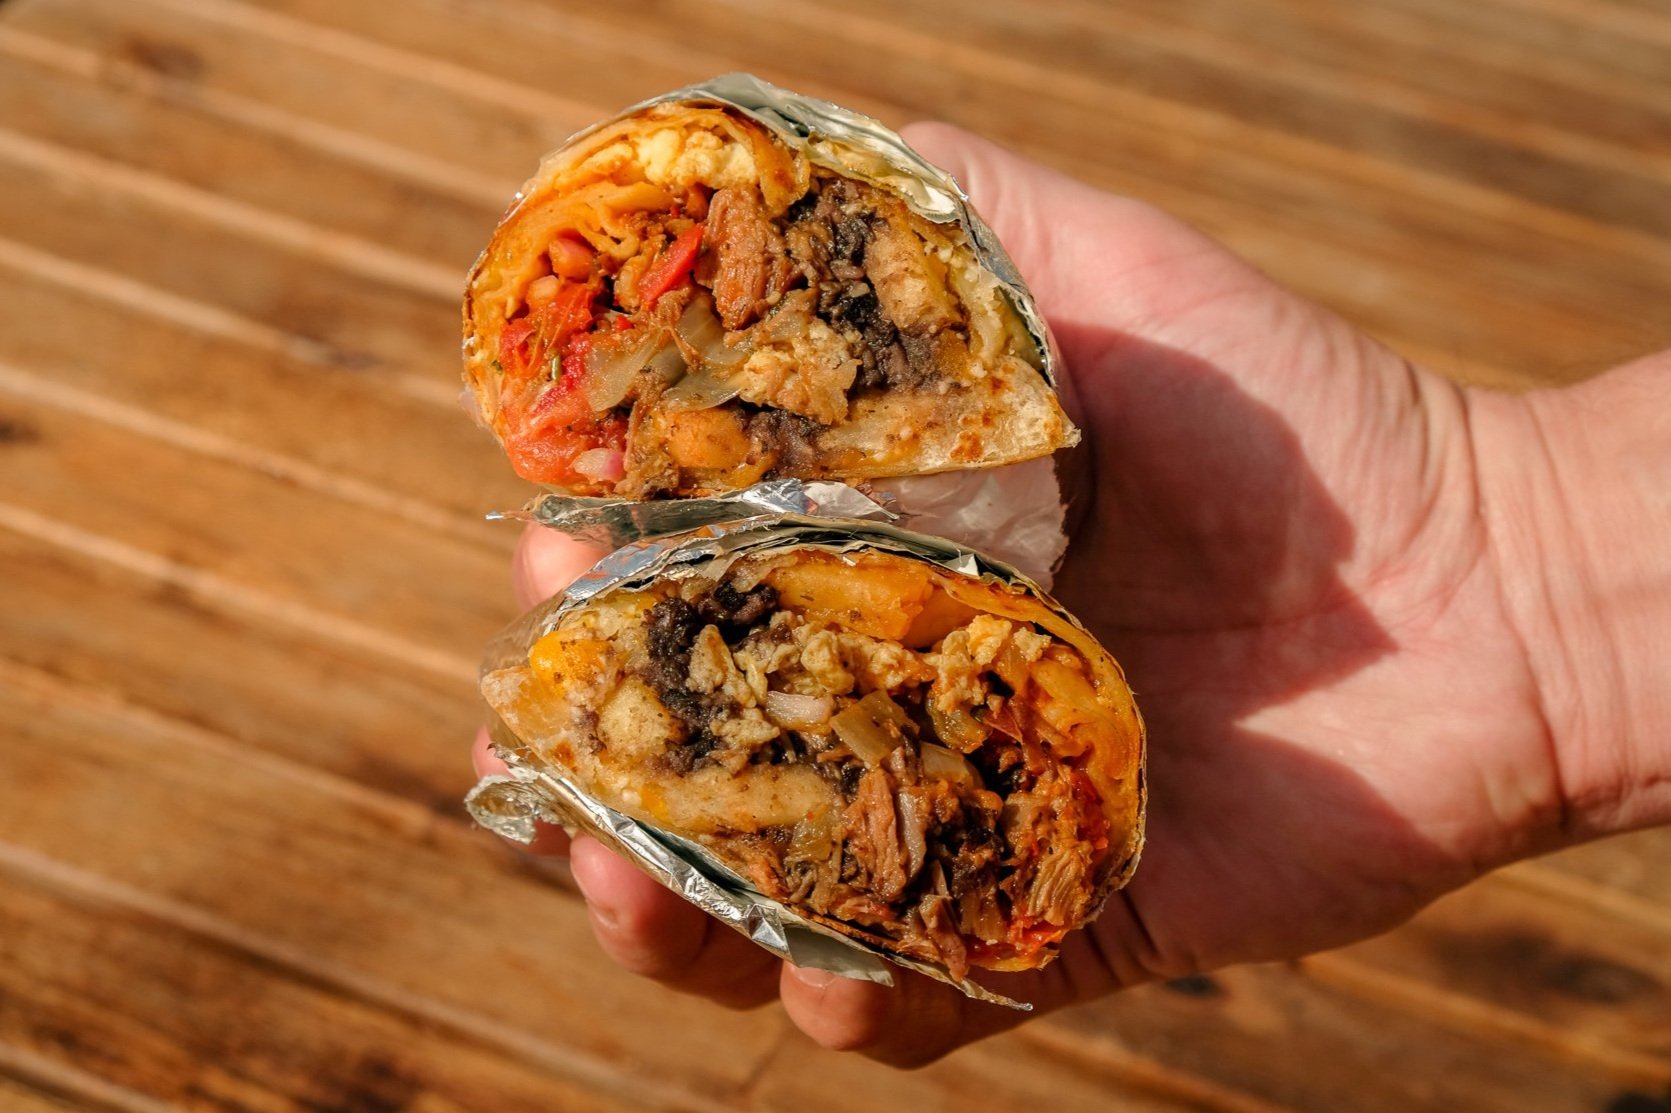  a hand holding a breakfast burrito cut in half to show the insides 